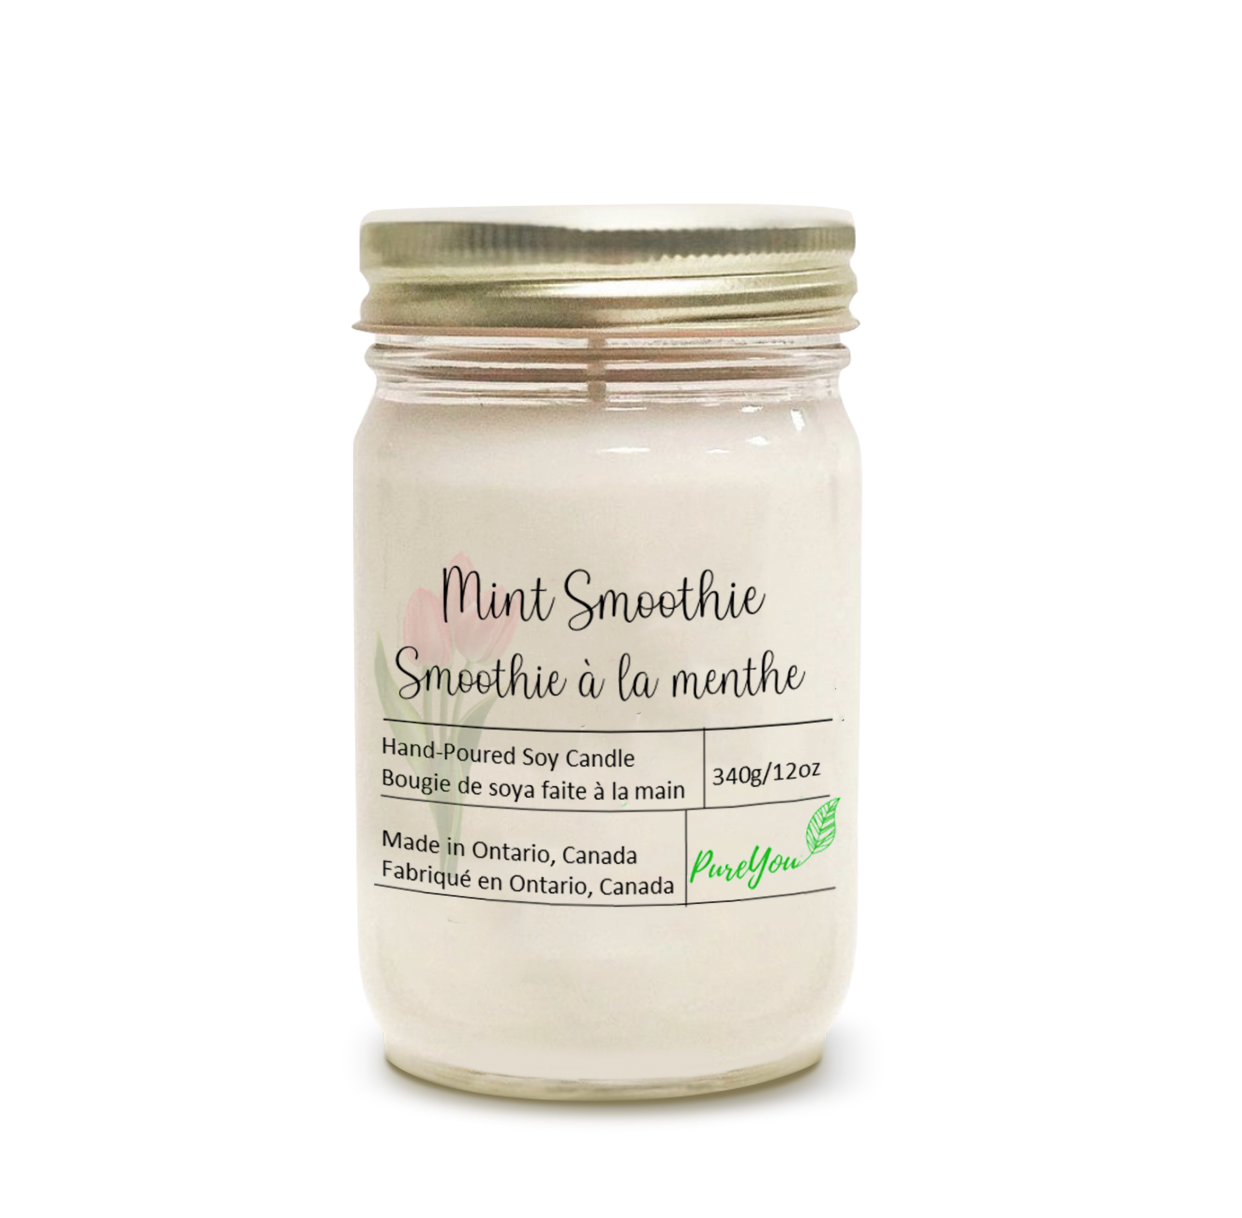 Mint Smoothie Soy Wax Candle